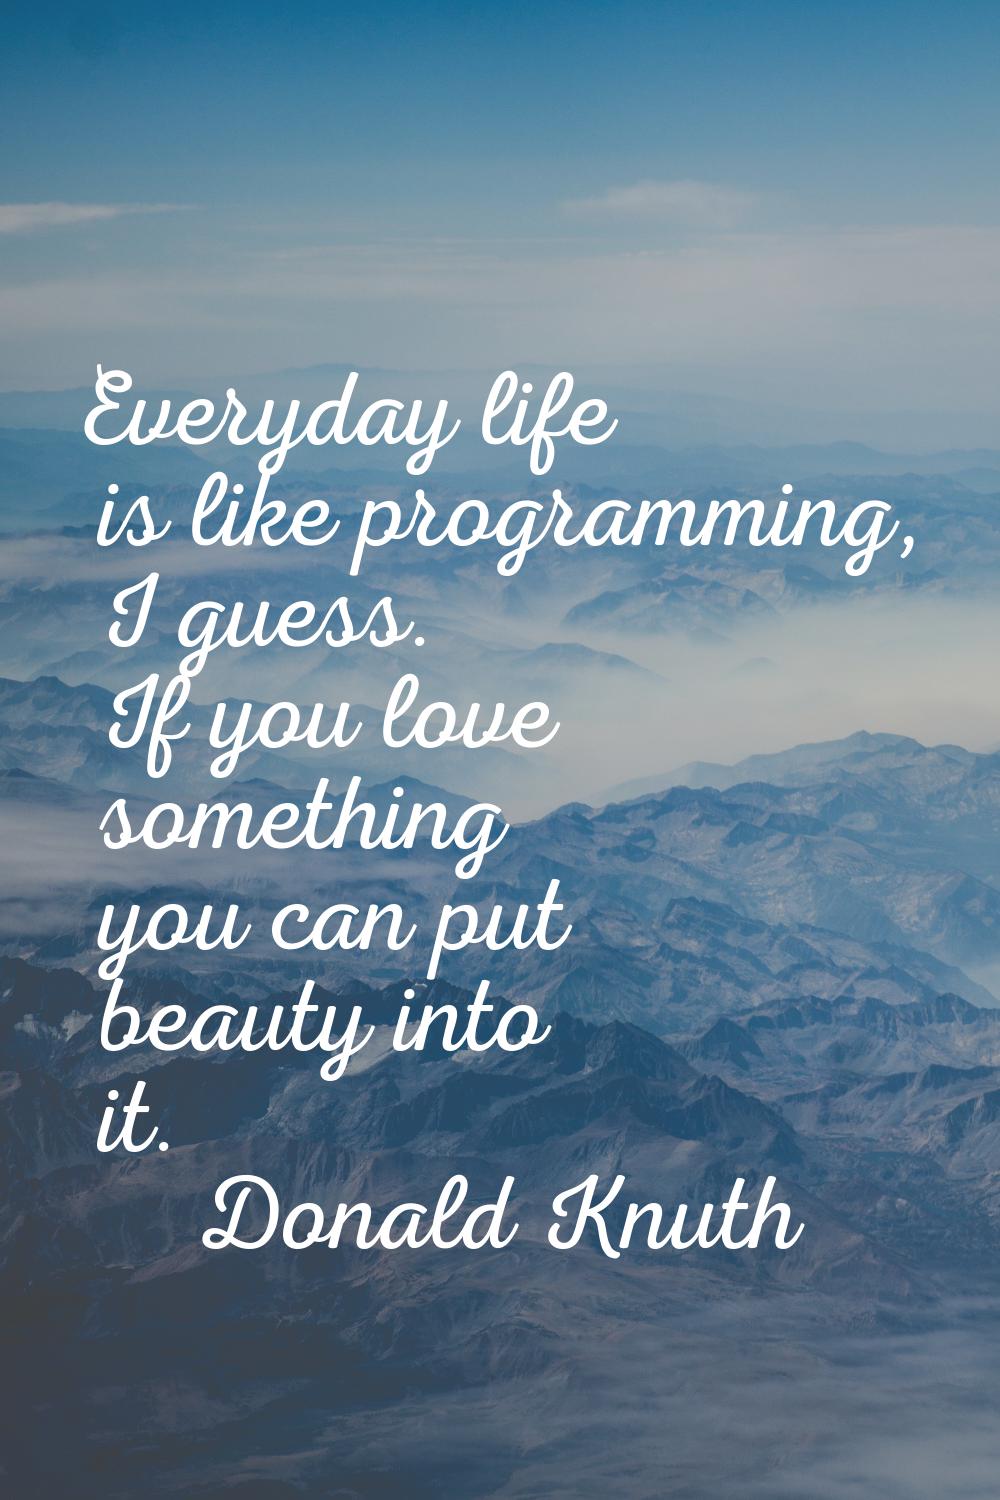 Everyday life is like programming, I guess. If you love something you can put beauty into it.